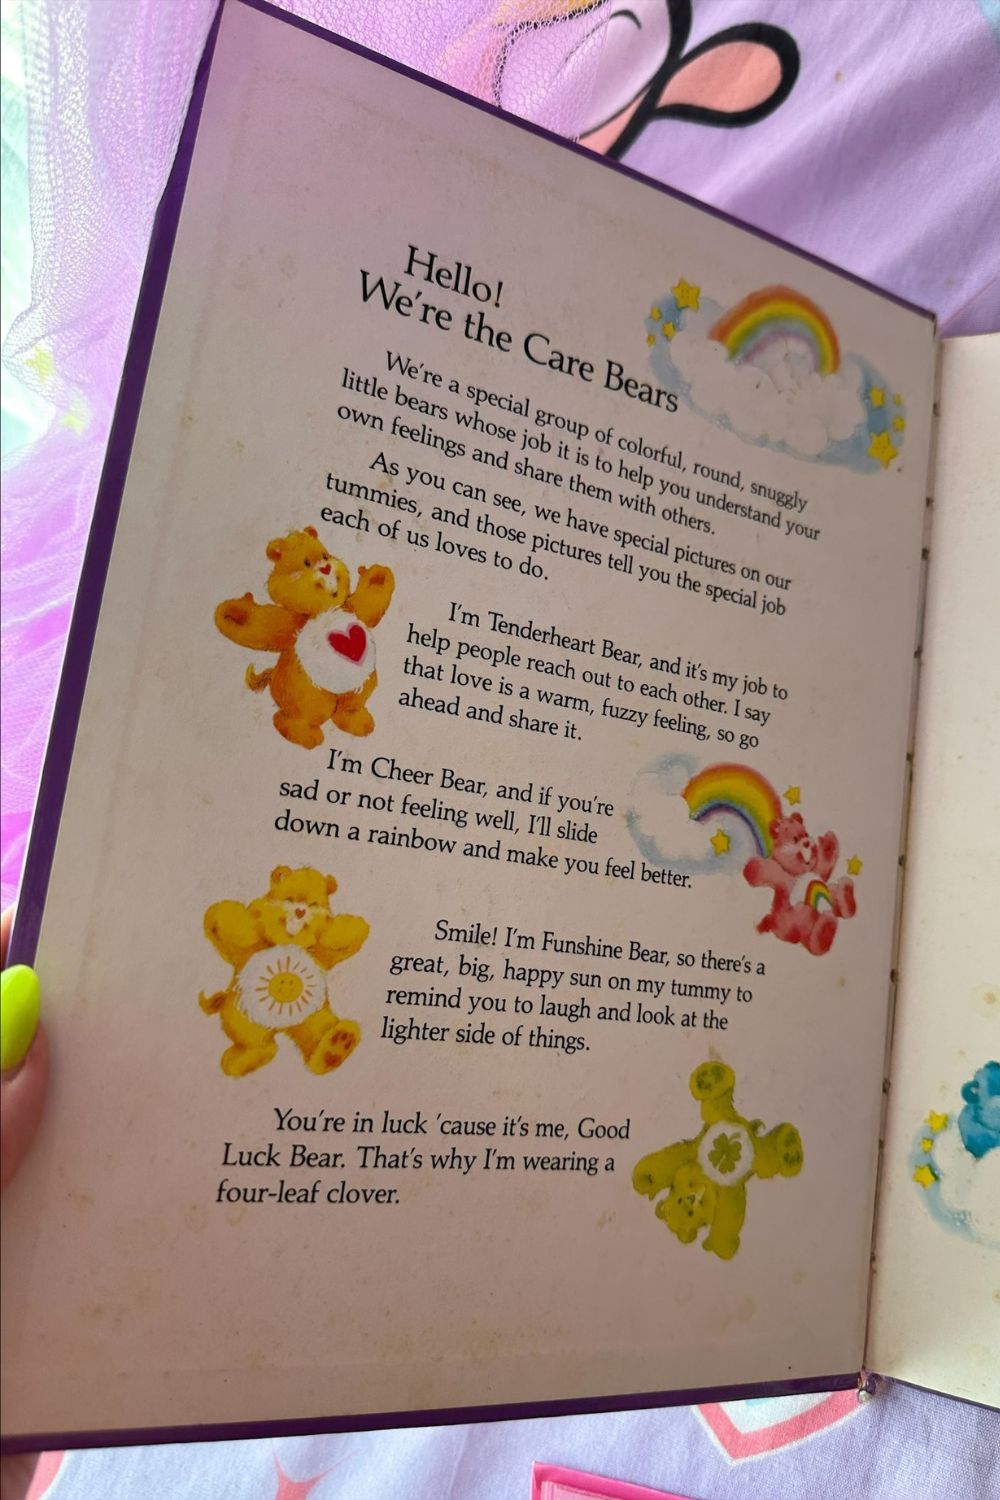 VINTAGE 1980'S CARE BEARS "YOUR BEST WISHES CAN COME TRUE" BOOK*